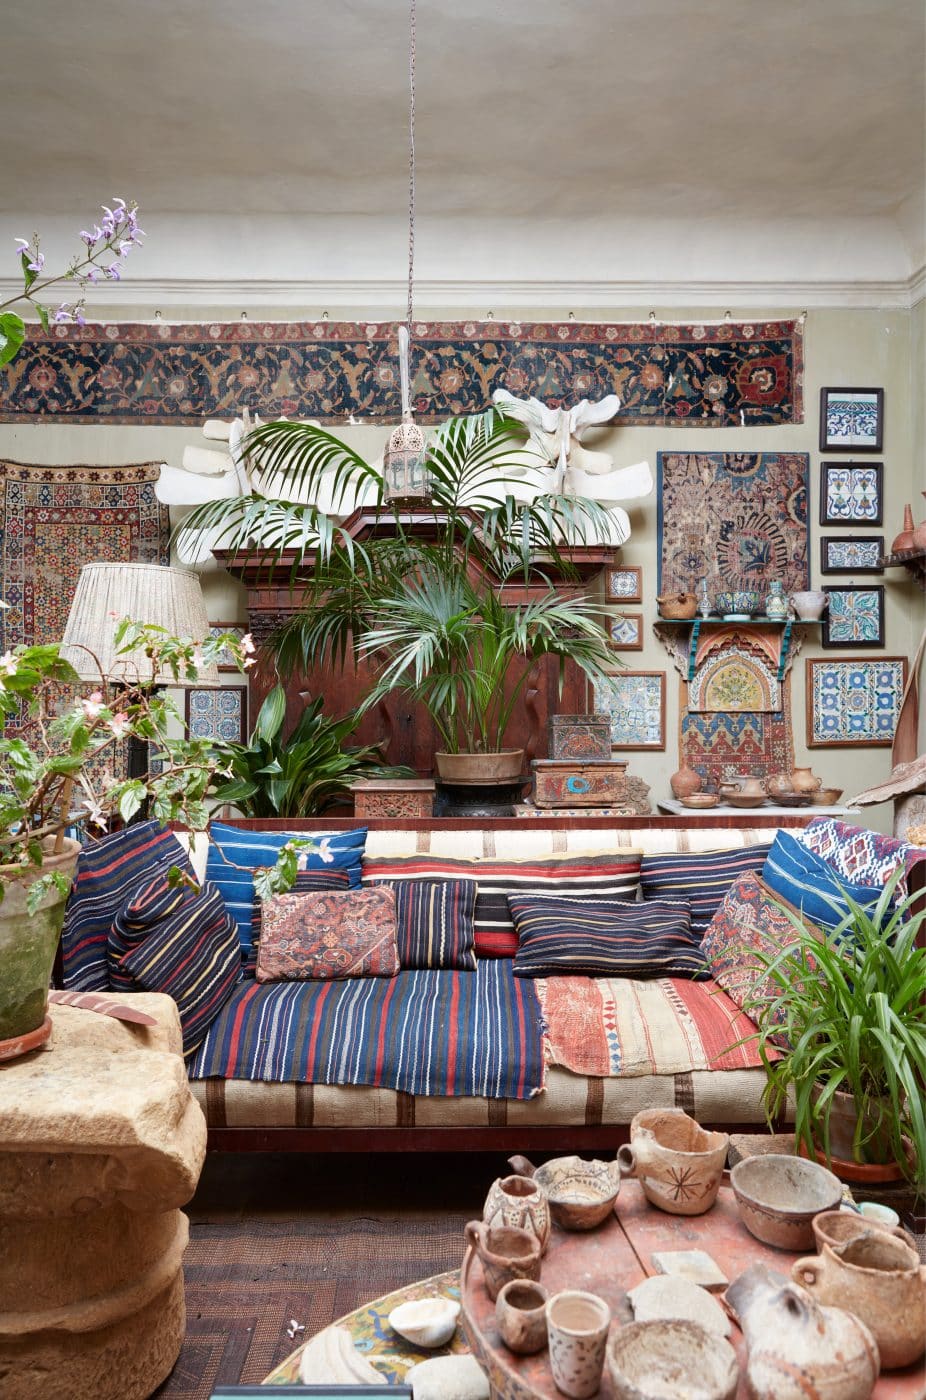 Sun and plant-filled interior at home of Umberto Pasti and Stephan Janson as featured in the Rizzoli book The House of a Lifetime: A Collector's Journey in Tangier Morocco 